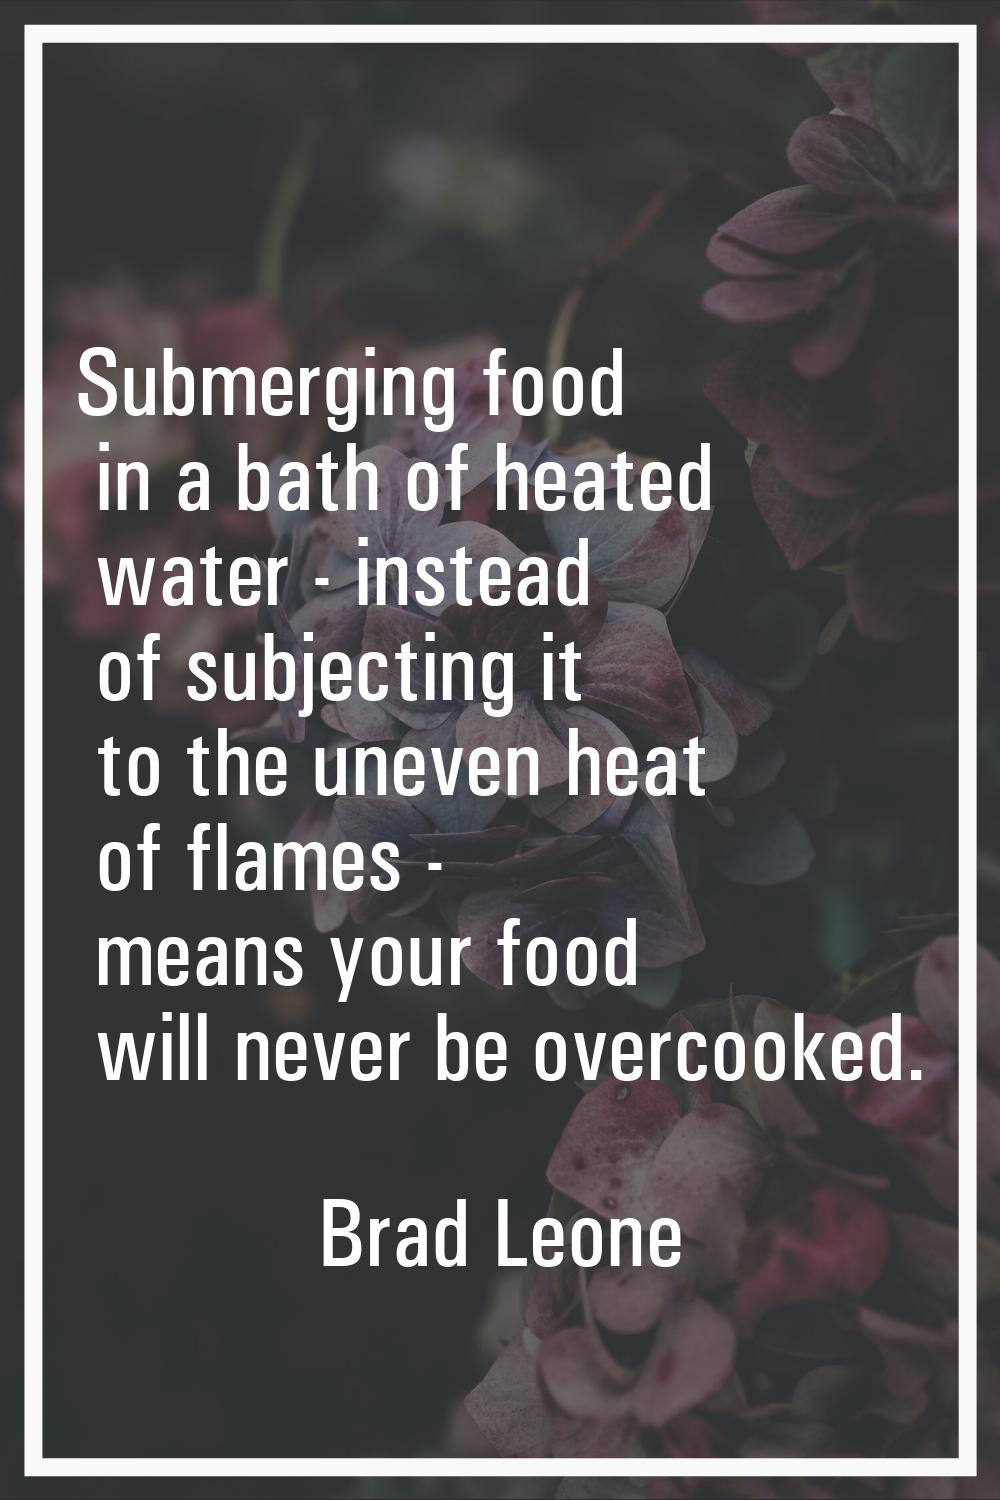 Submerging food in a bath of heated water - instead of subjecting it to the uneven heat of flames -